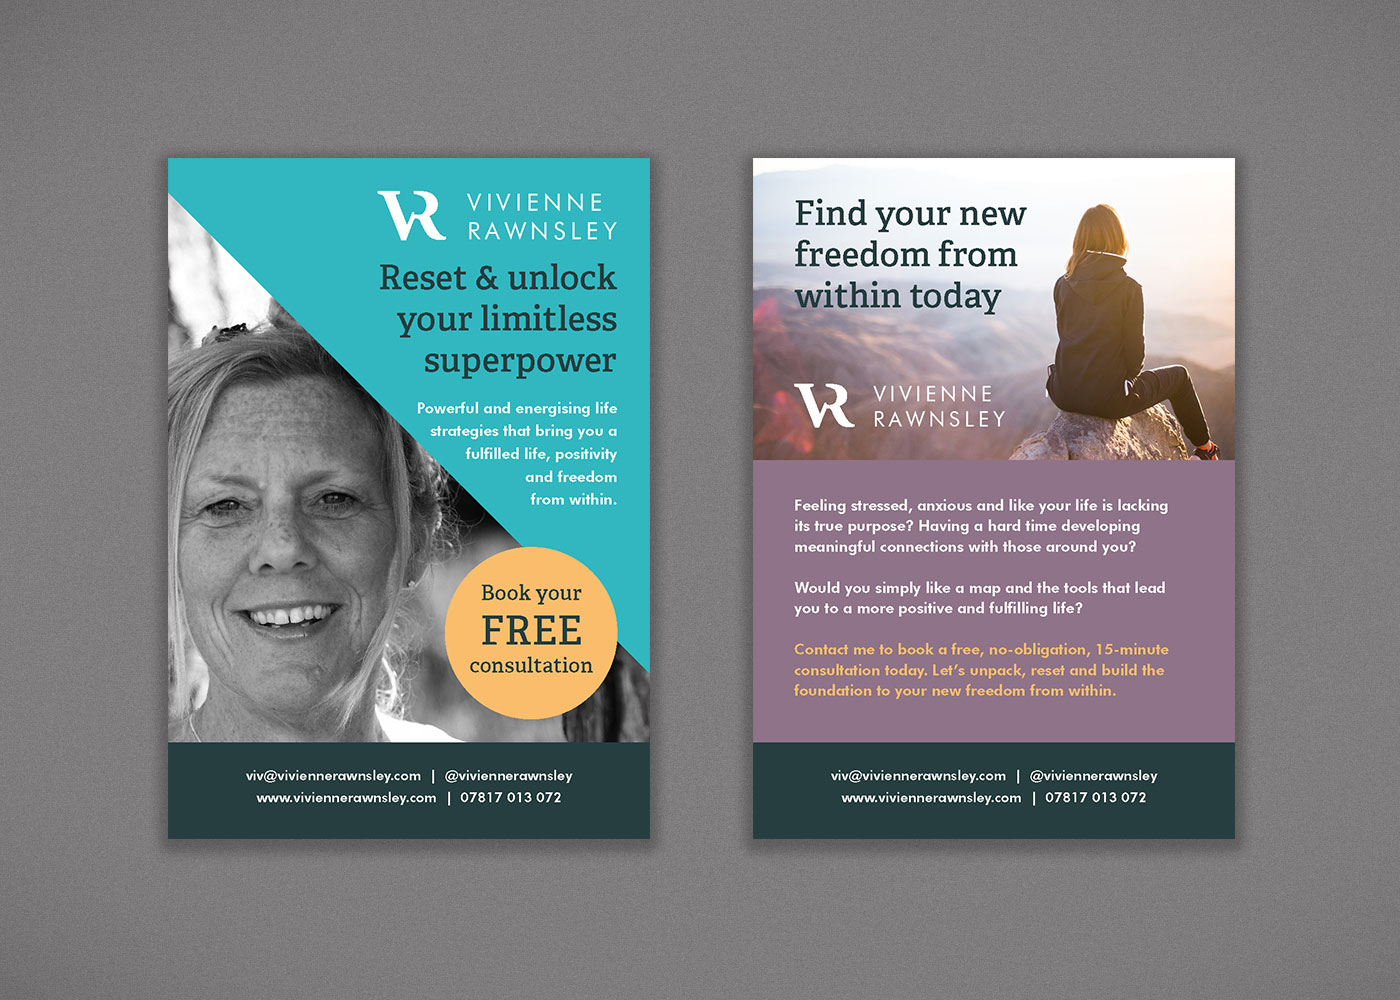 Vivienne Rawnsley Marketing Materials by Hive of Many